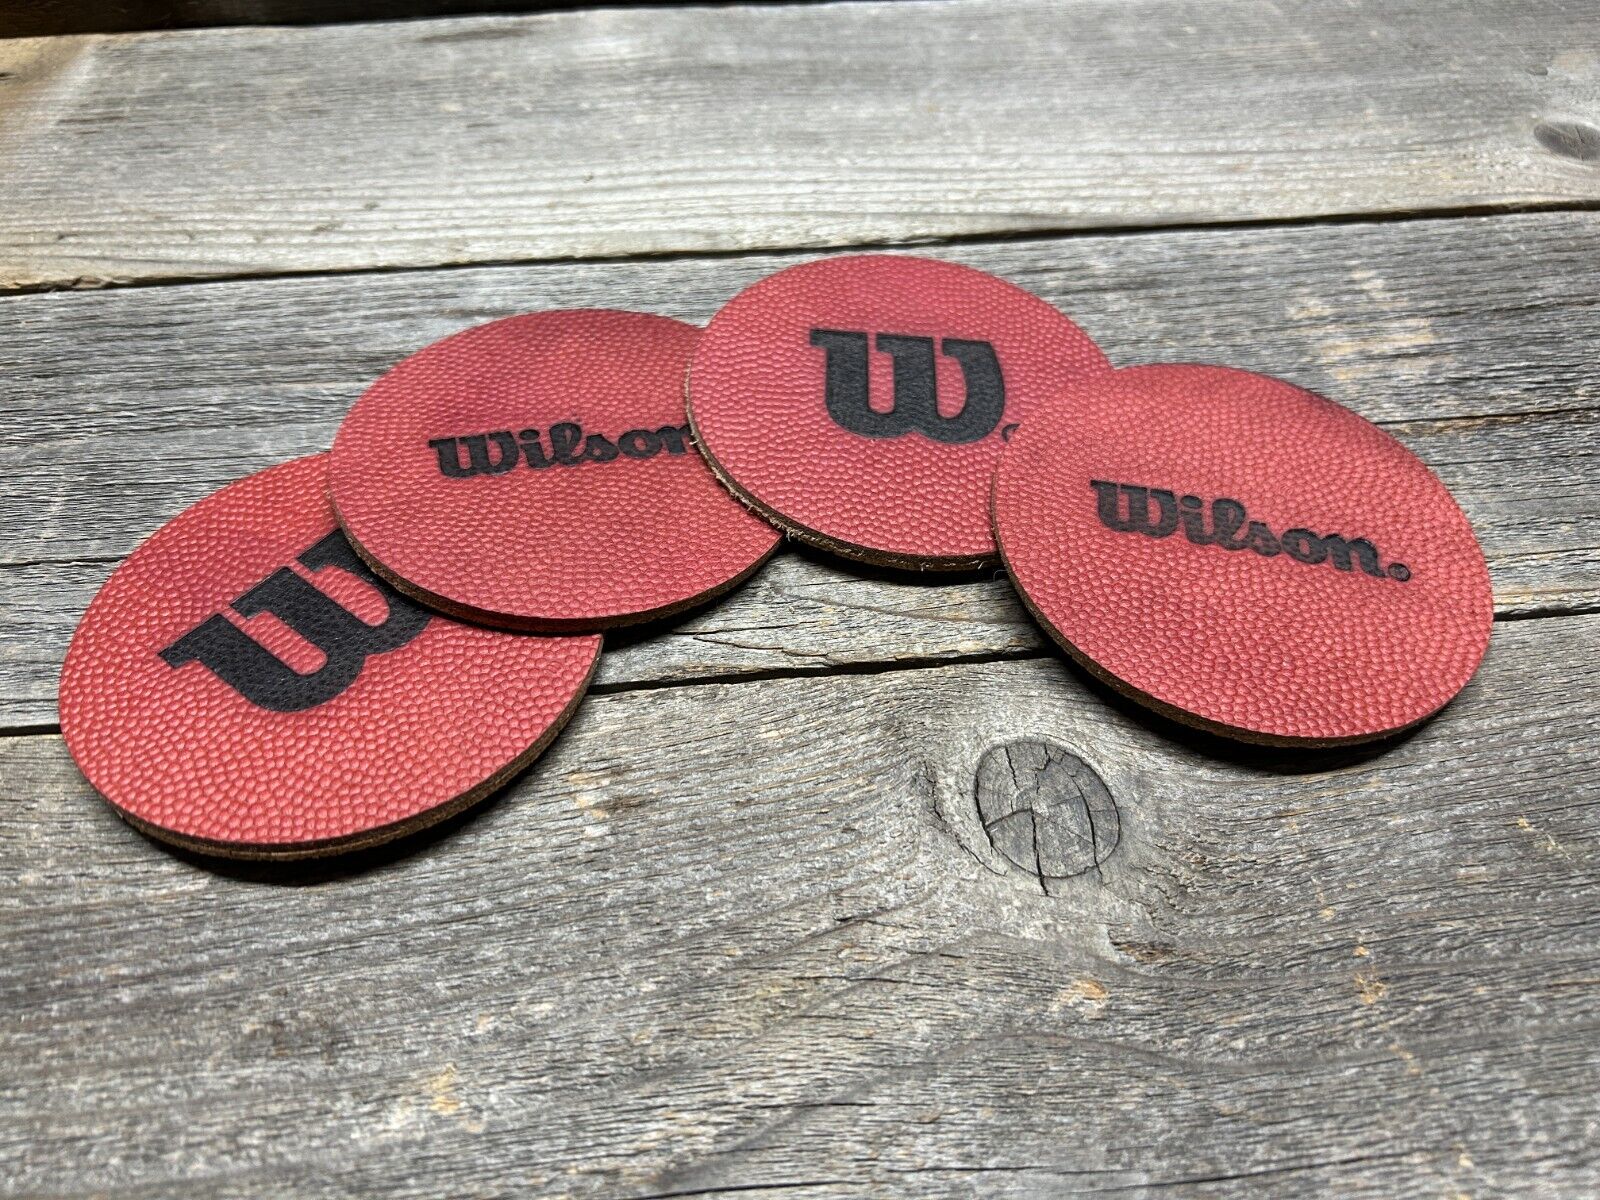 Set of 4 Coasters - WILSON/Horween NFL Leather - Official NFL Football Leather